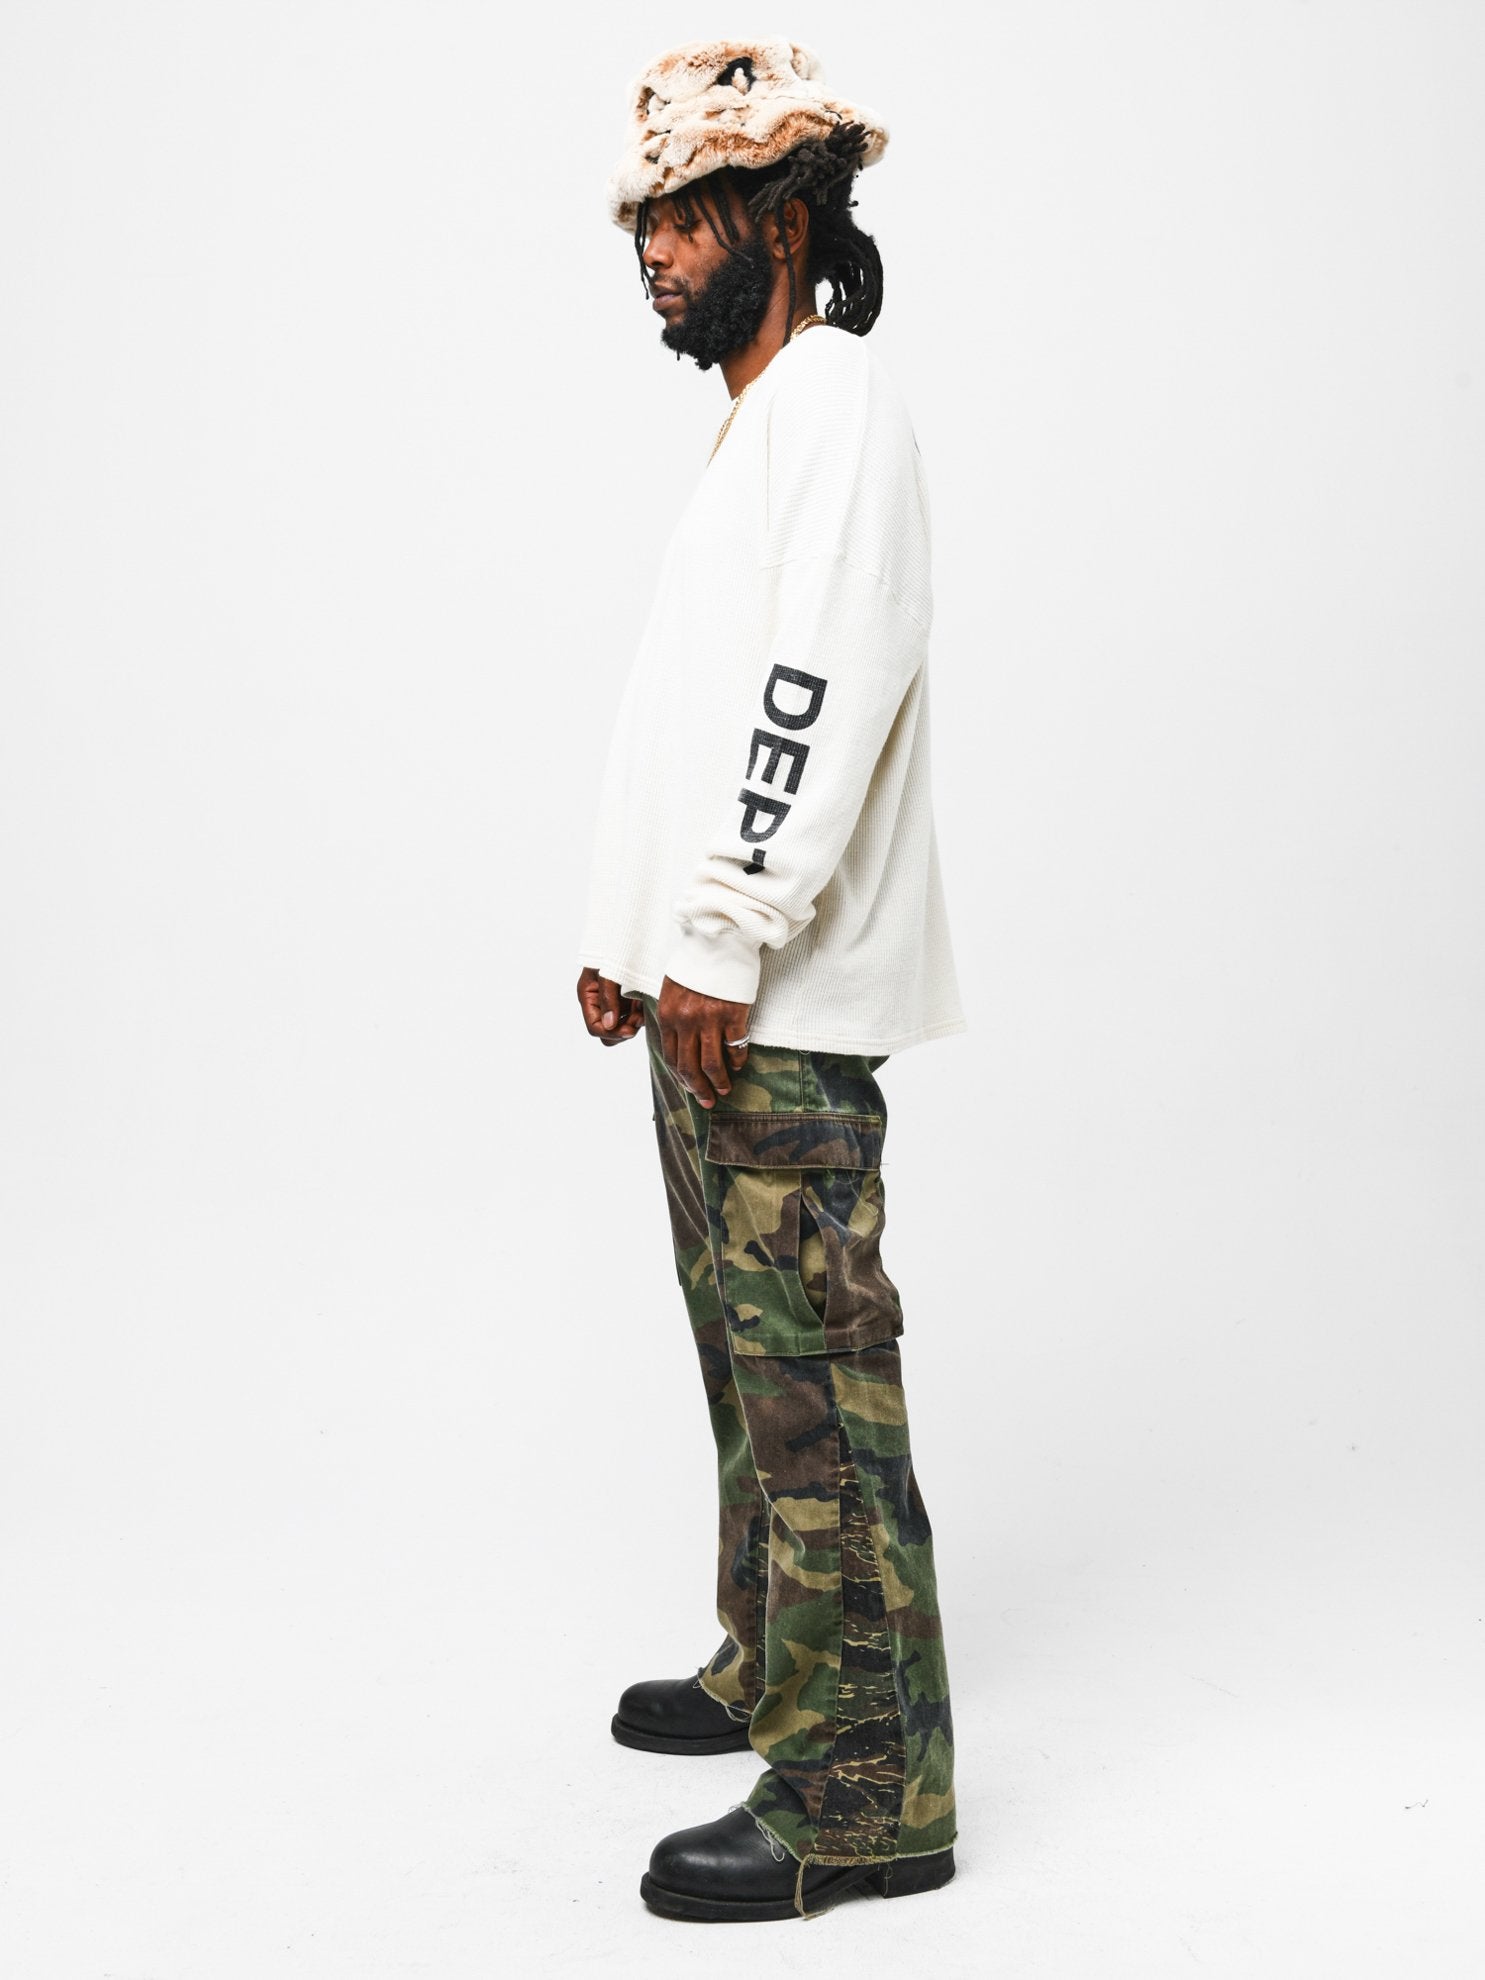 GENERAL CARGO FLARE PANT - CAMO